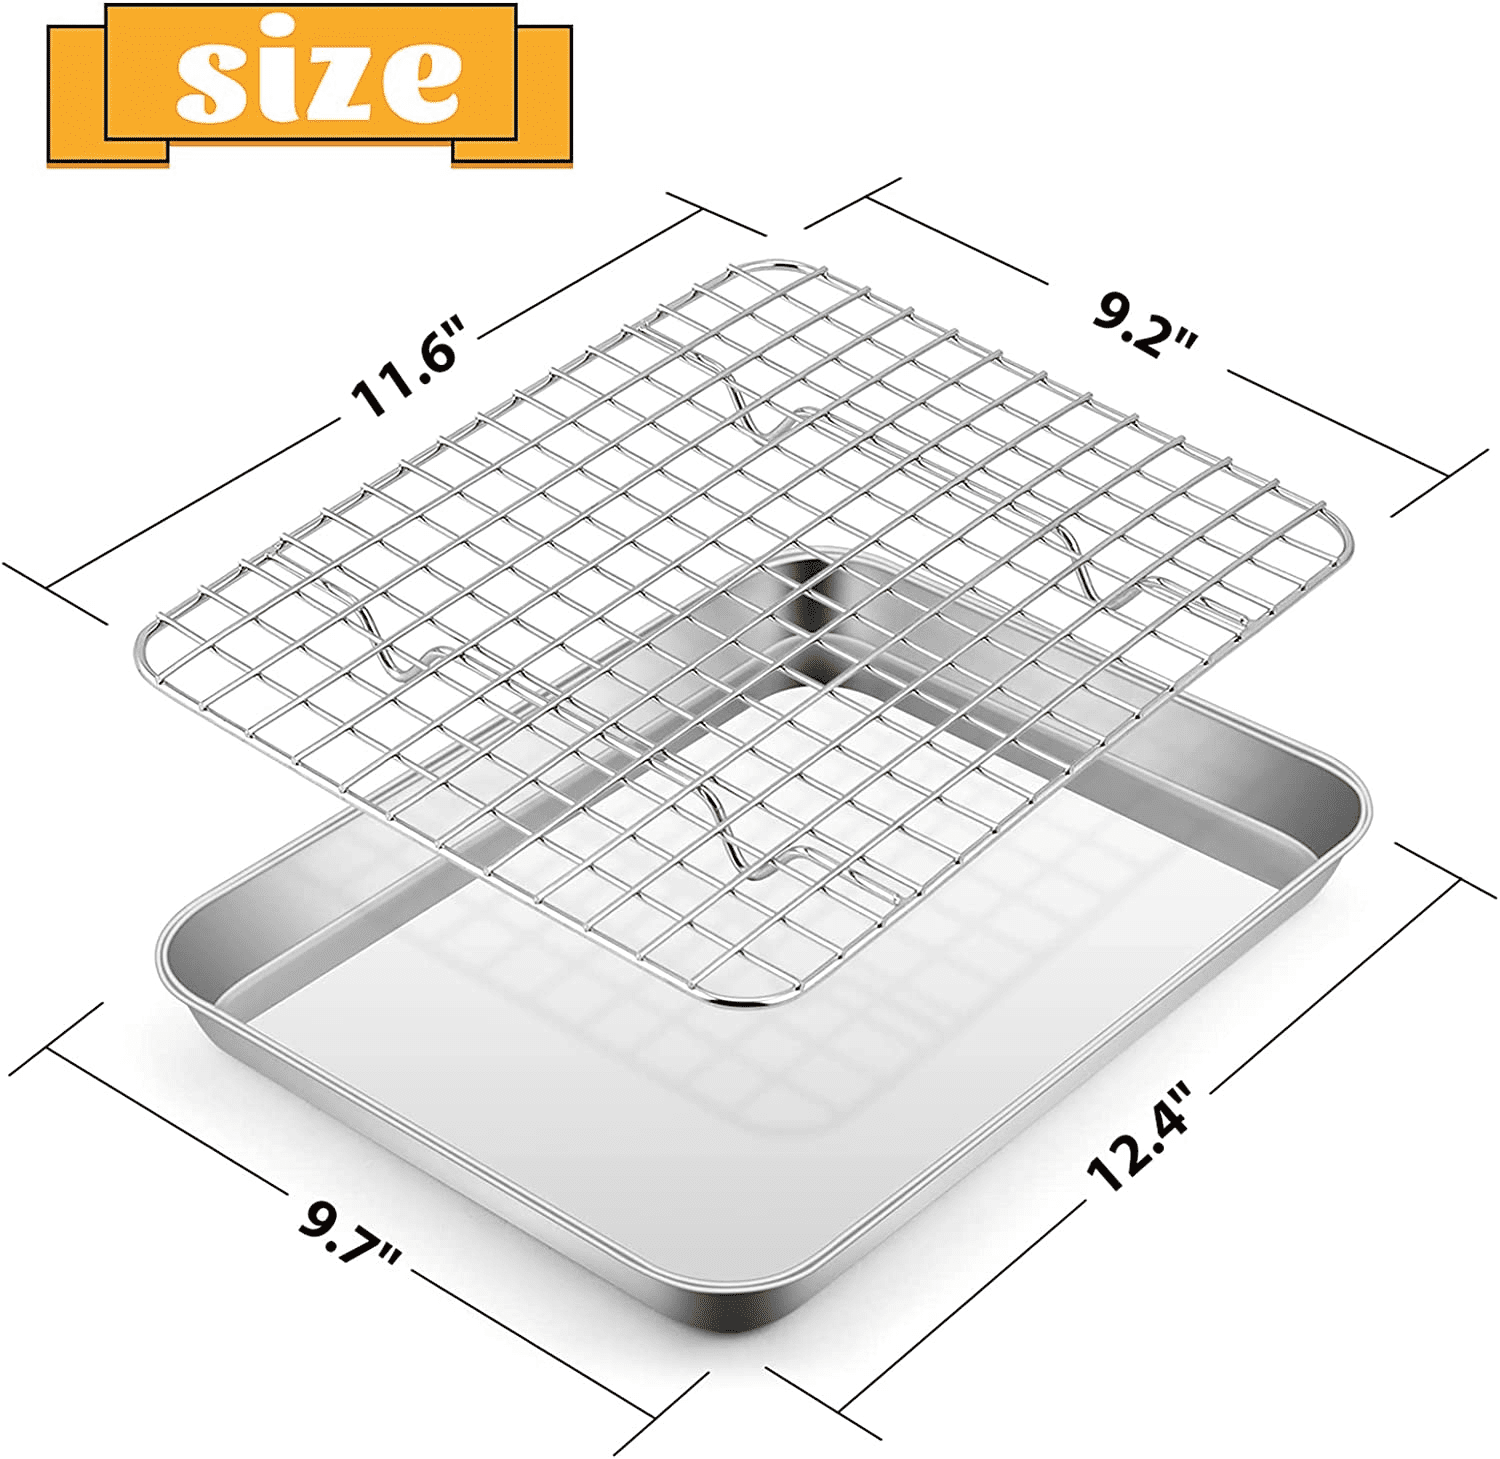  Baking Sheet with Rack Set, E-far 16”x12” Stainless Steel Cookie  Sheet Pan for Oven, Rimmed Metal Tray with Wire Cooling Rack for Cooking  Roasting Resting Bacon Meat Steak - Dishwasher Safe